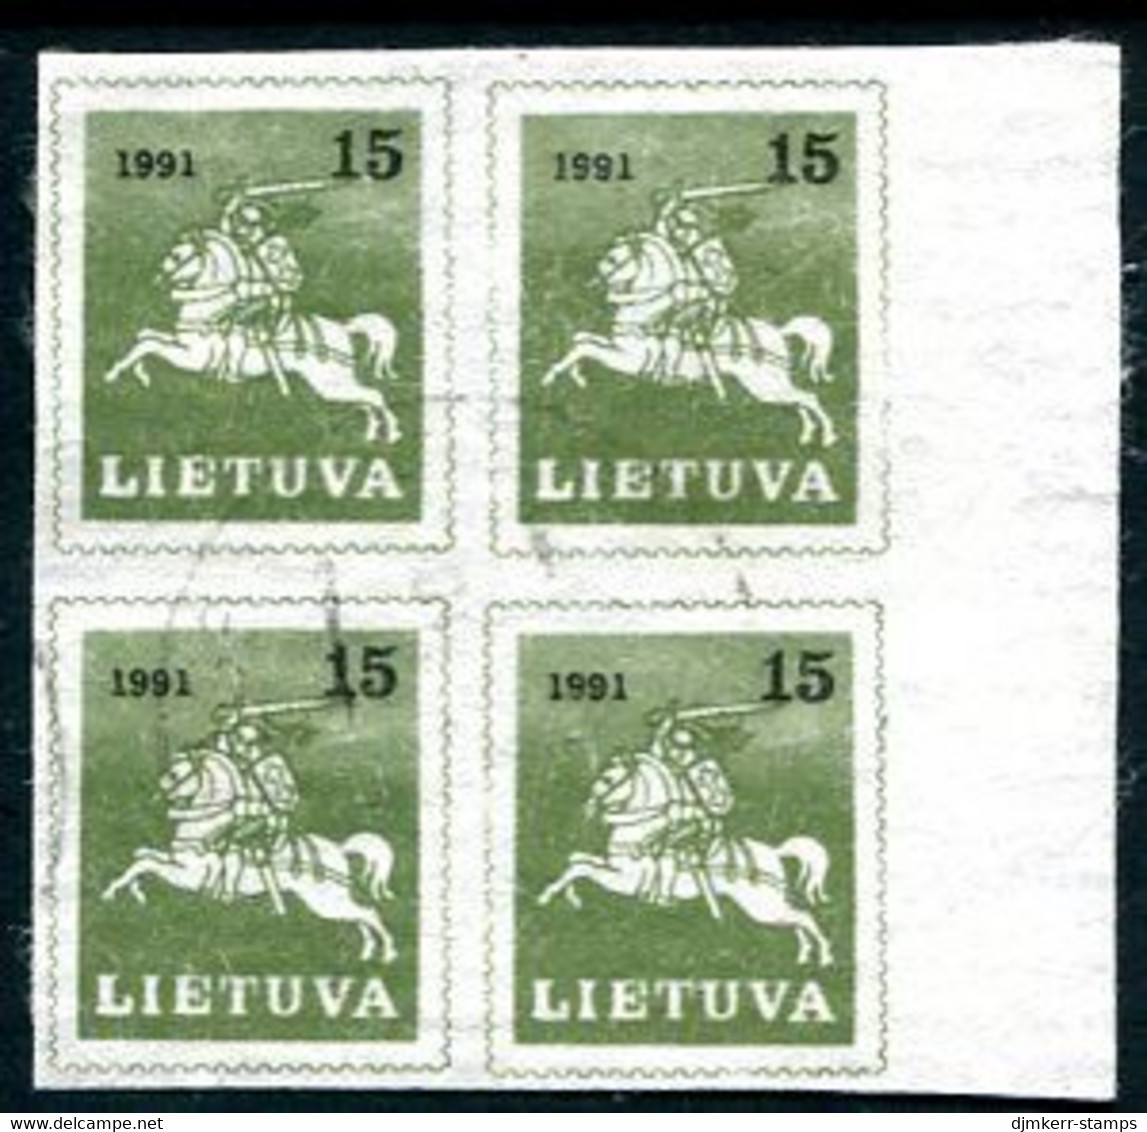 LITHUANIA 1991  Lithuanian Knight Definitive Imperforate Block Of 4 Used.  Michel 472 - Lituania